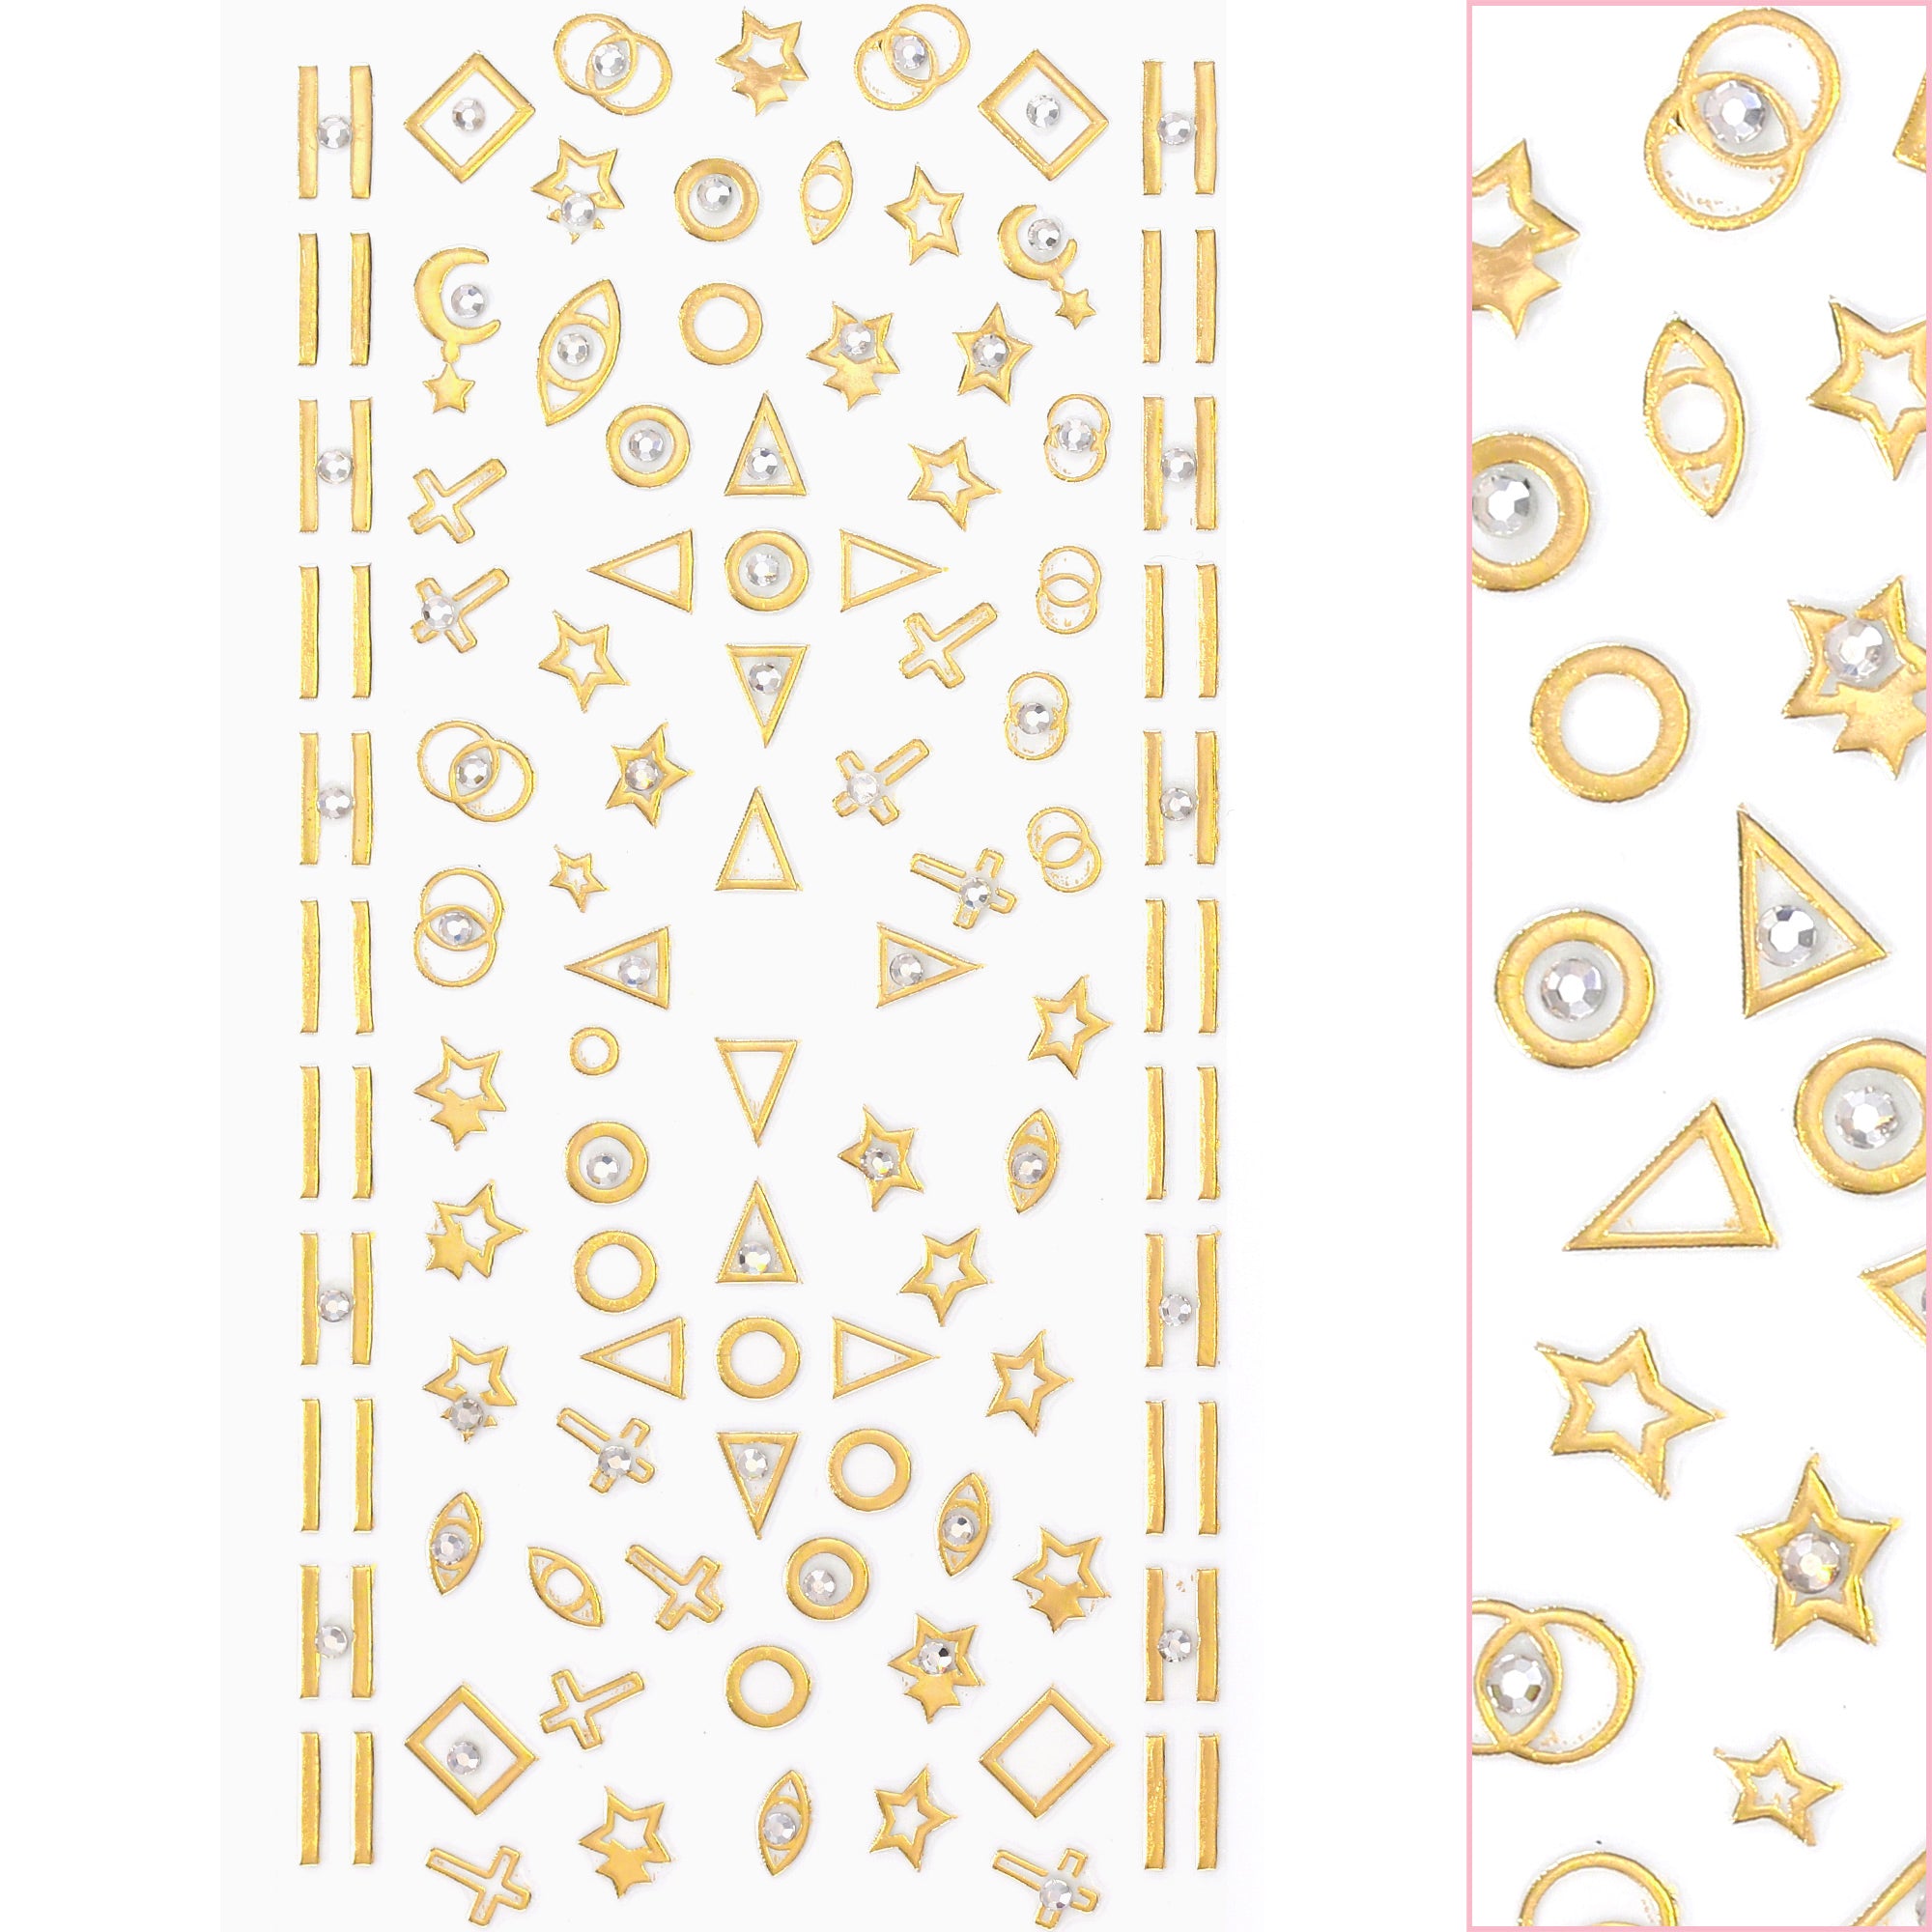 Daily Charme Gold Bejeweled Nail Art Sticker with Crystals / Mystic Geometric Shapes Triangle Star Bars